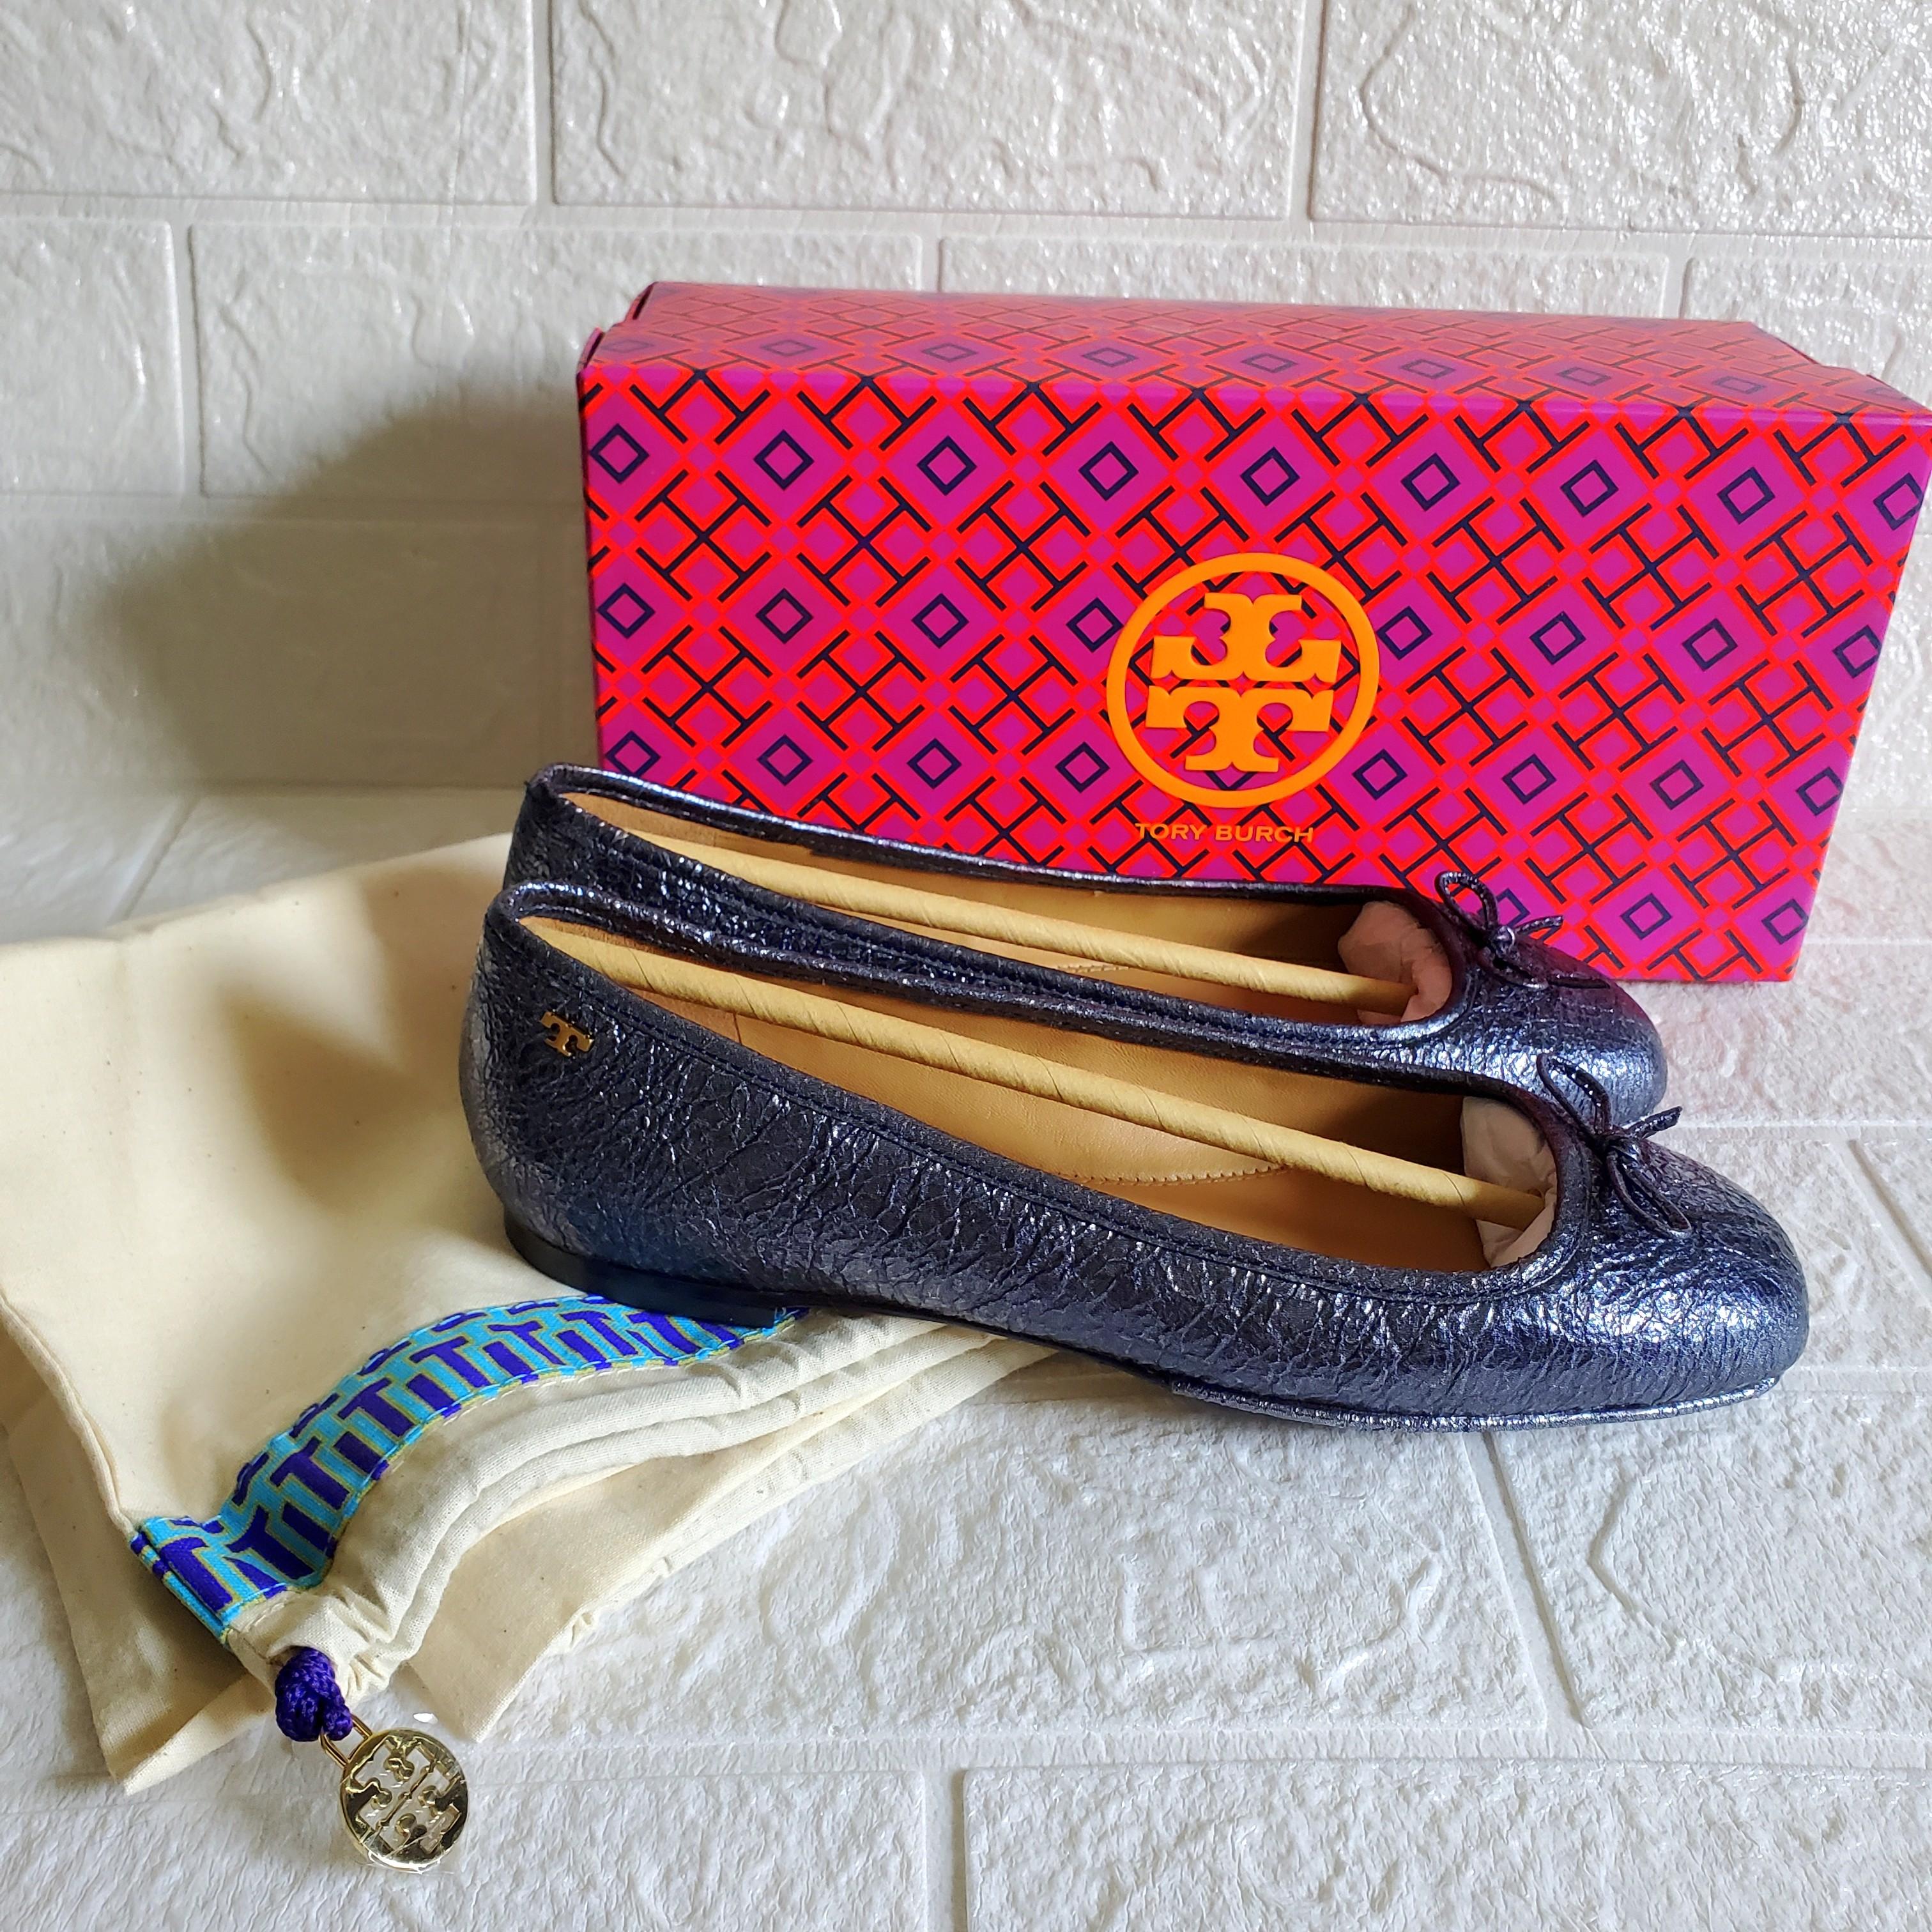 Tory Burch Laila 2 Driver Ballet Shoes Ballerina 平底鞋36 US6, 女裝, 鞋, Loafers  - Carousell